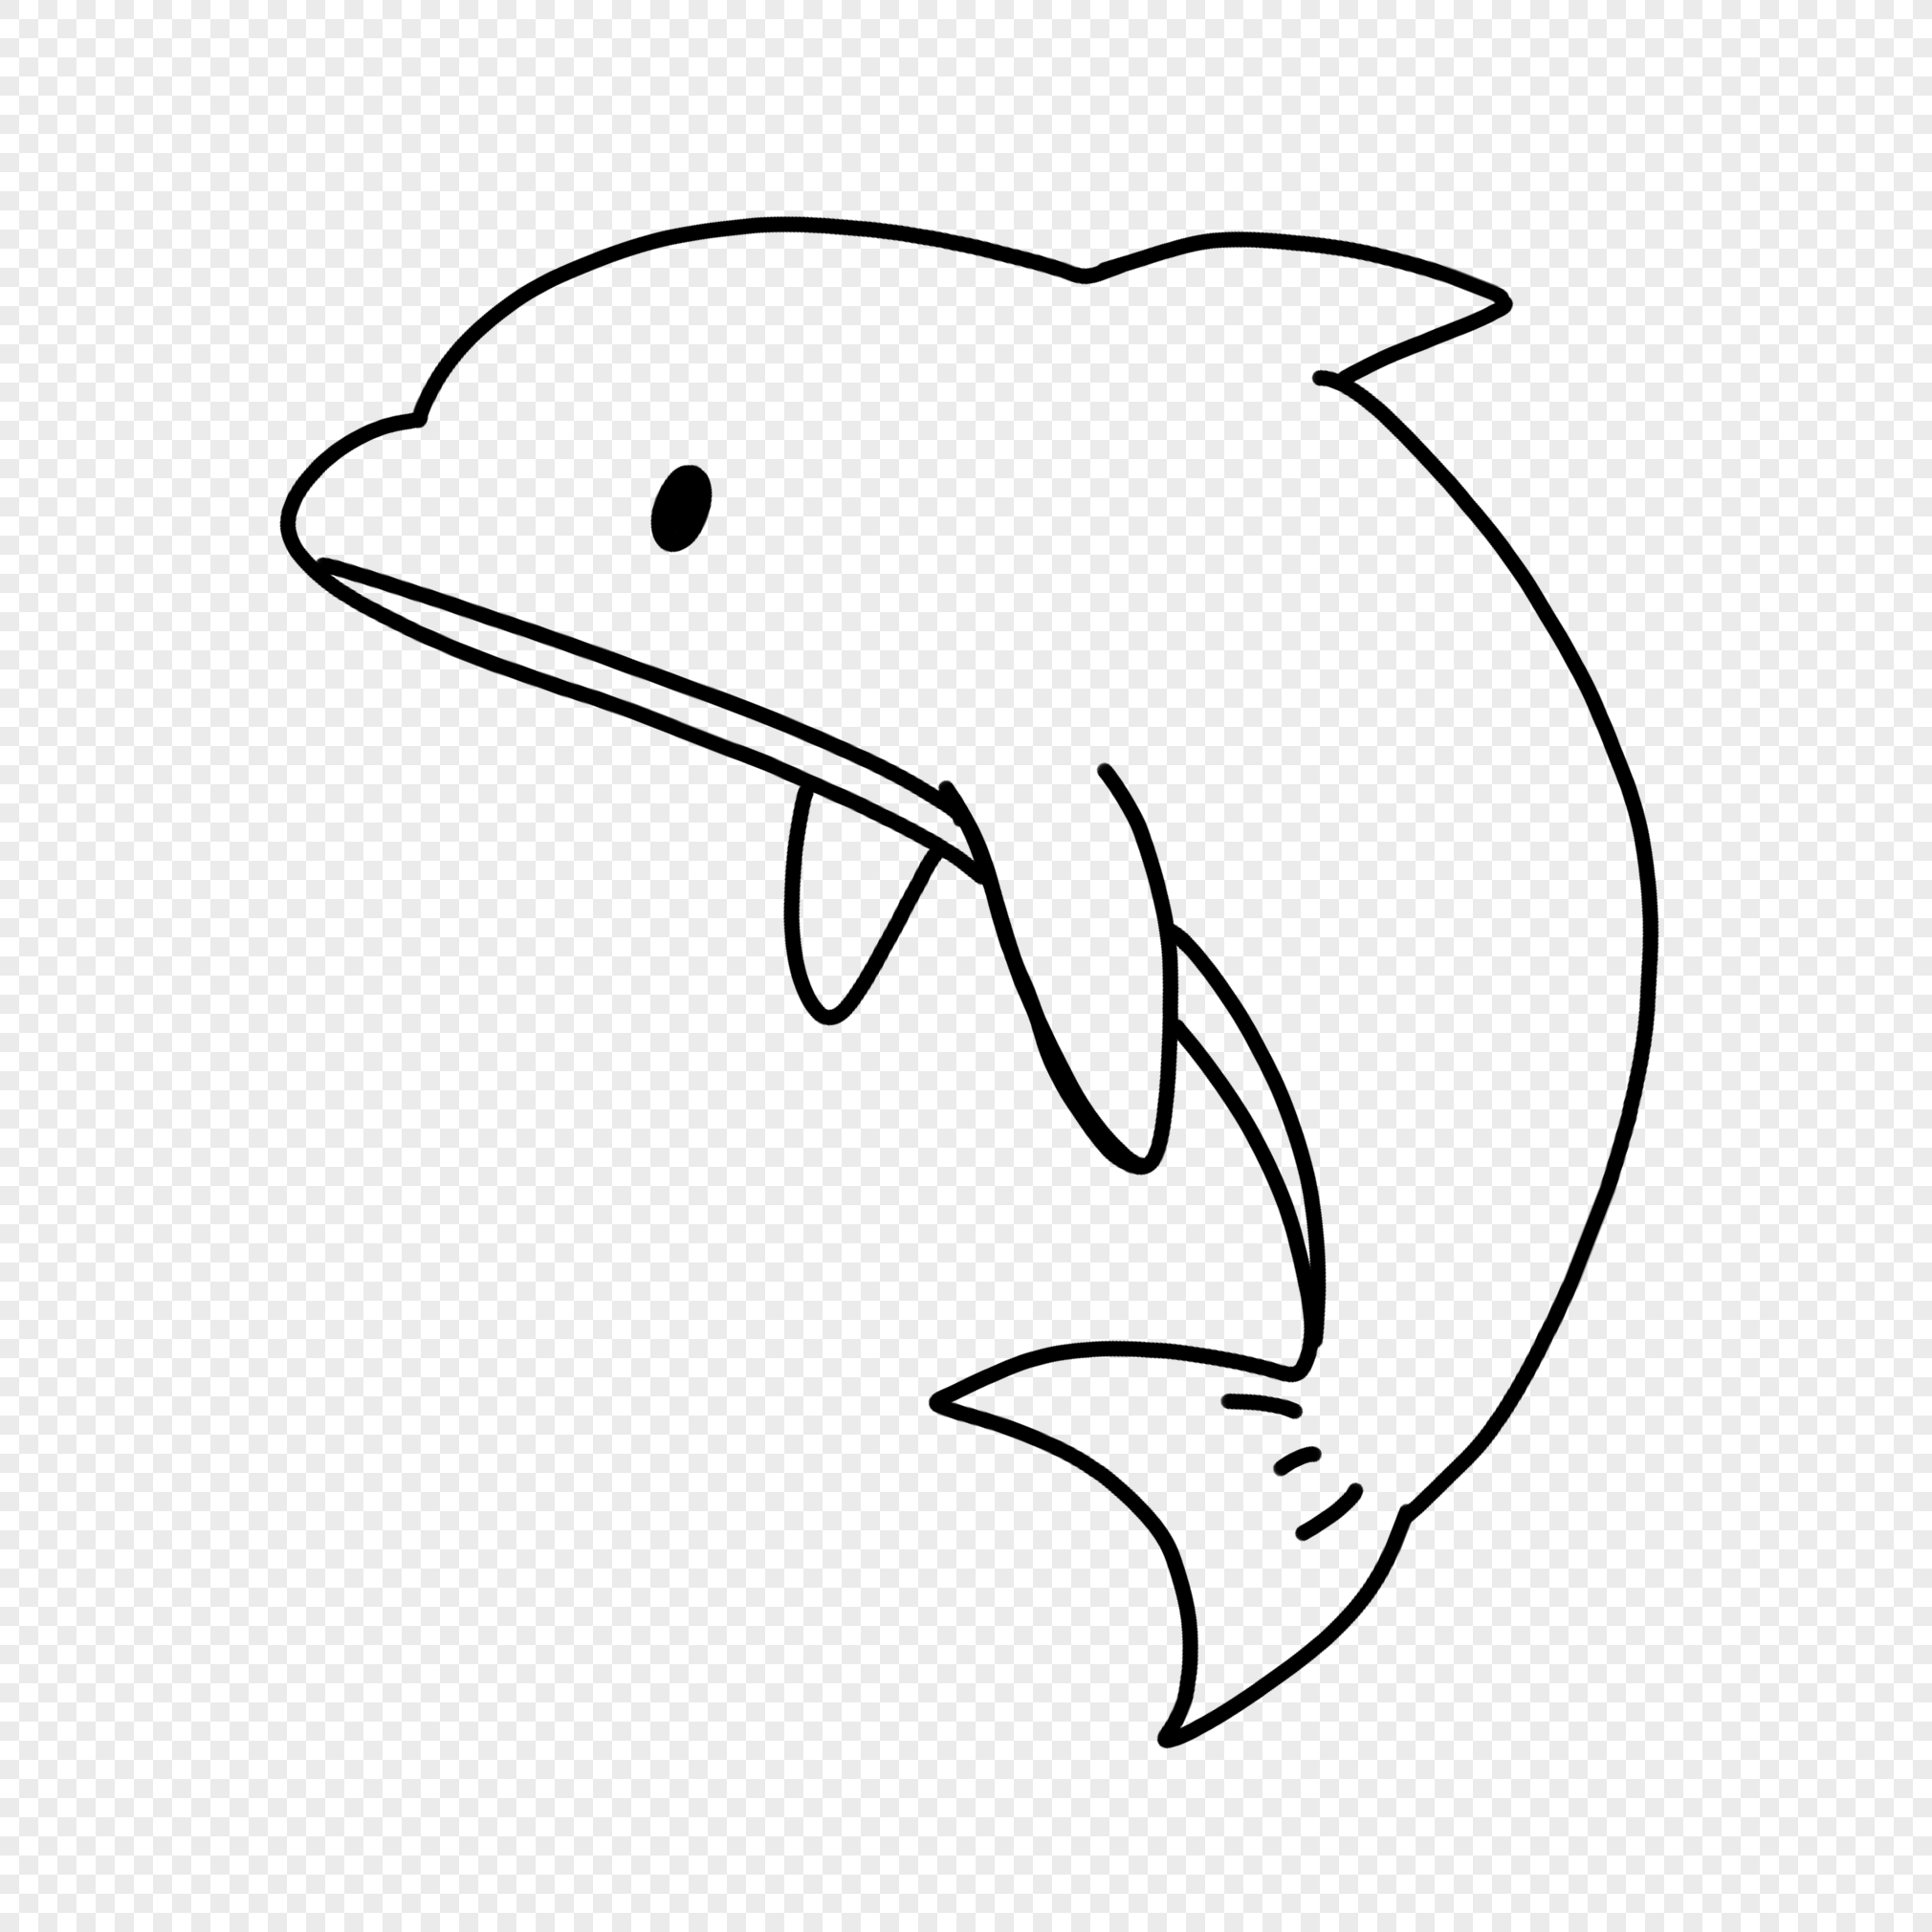 Dolphin Drawing Stock Photos and Images - 123RF